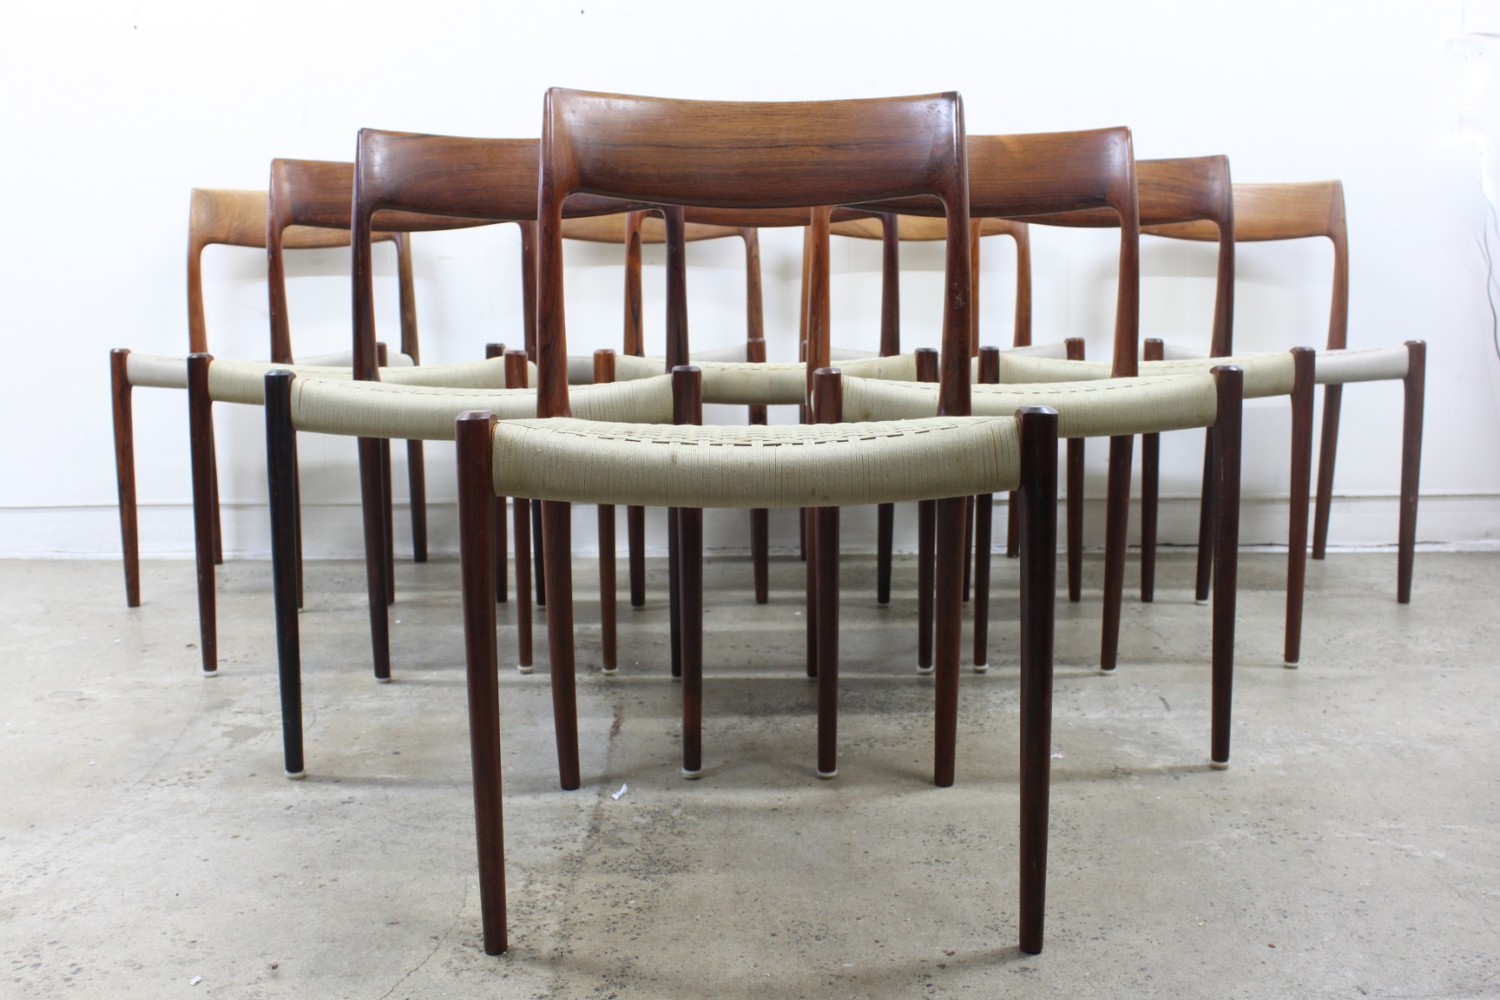 x10 Chairs by Niels Moller